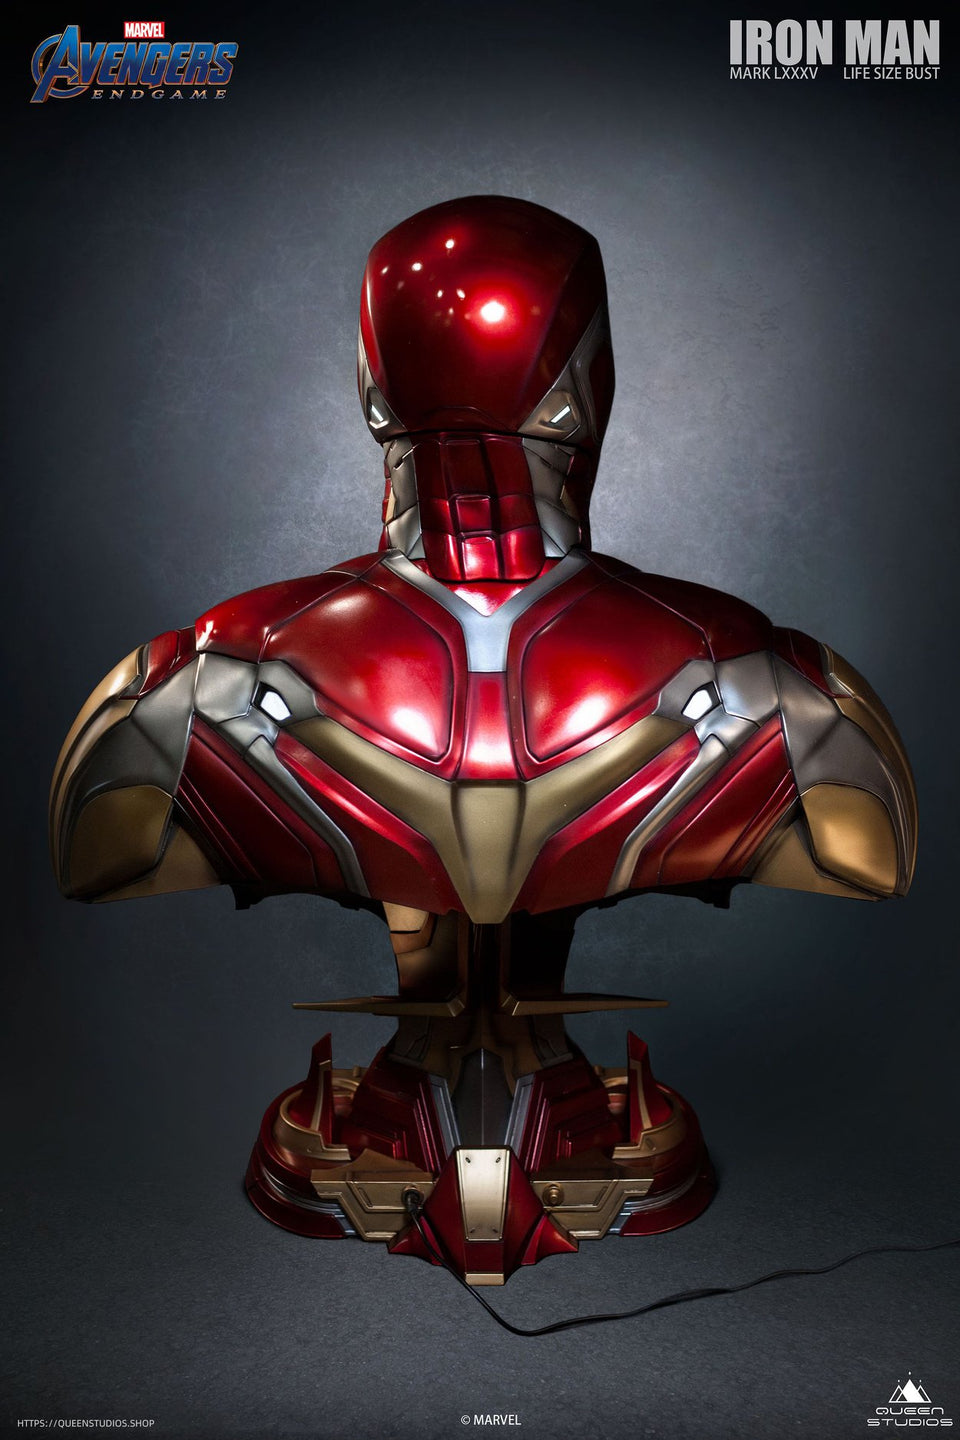 Queen Studios Iron Man Mark 85 1:1 Scale Life-size Bust